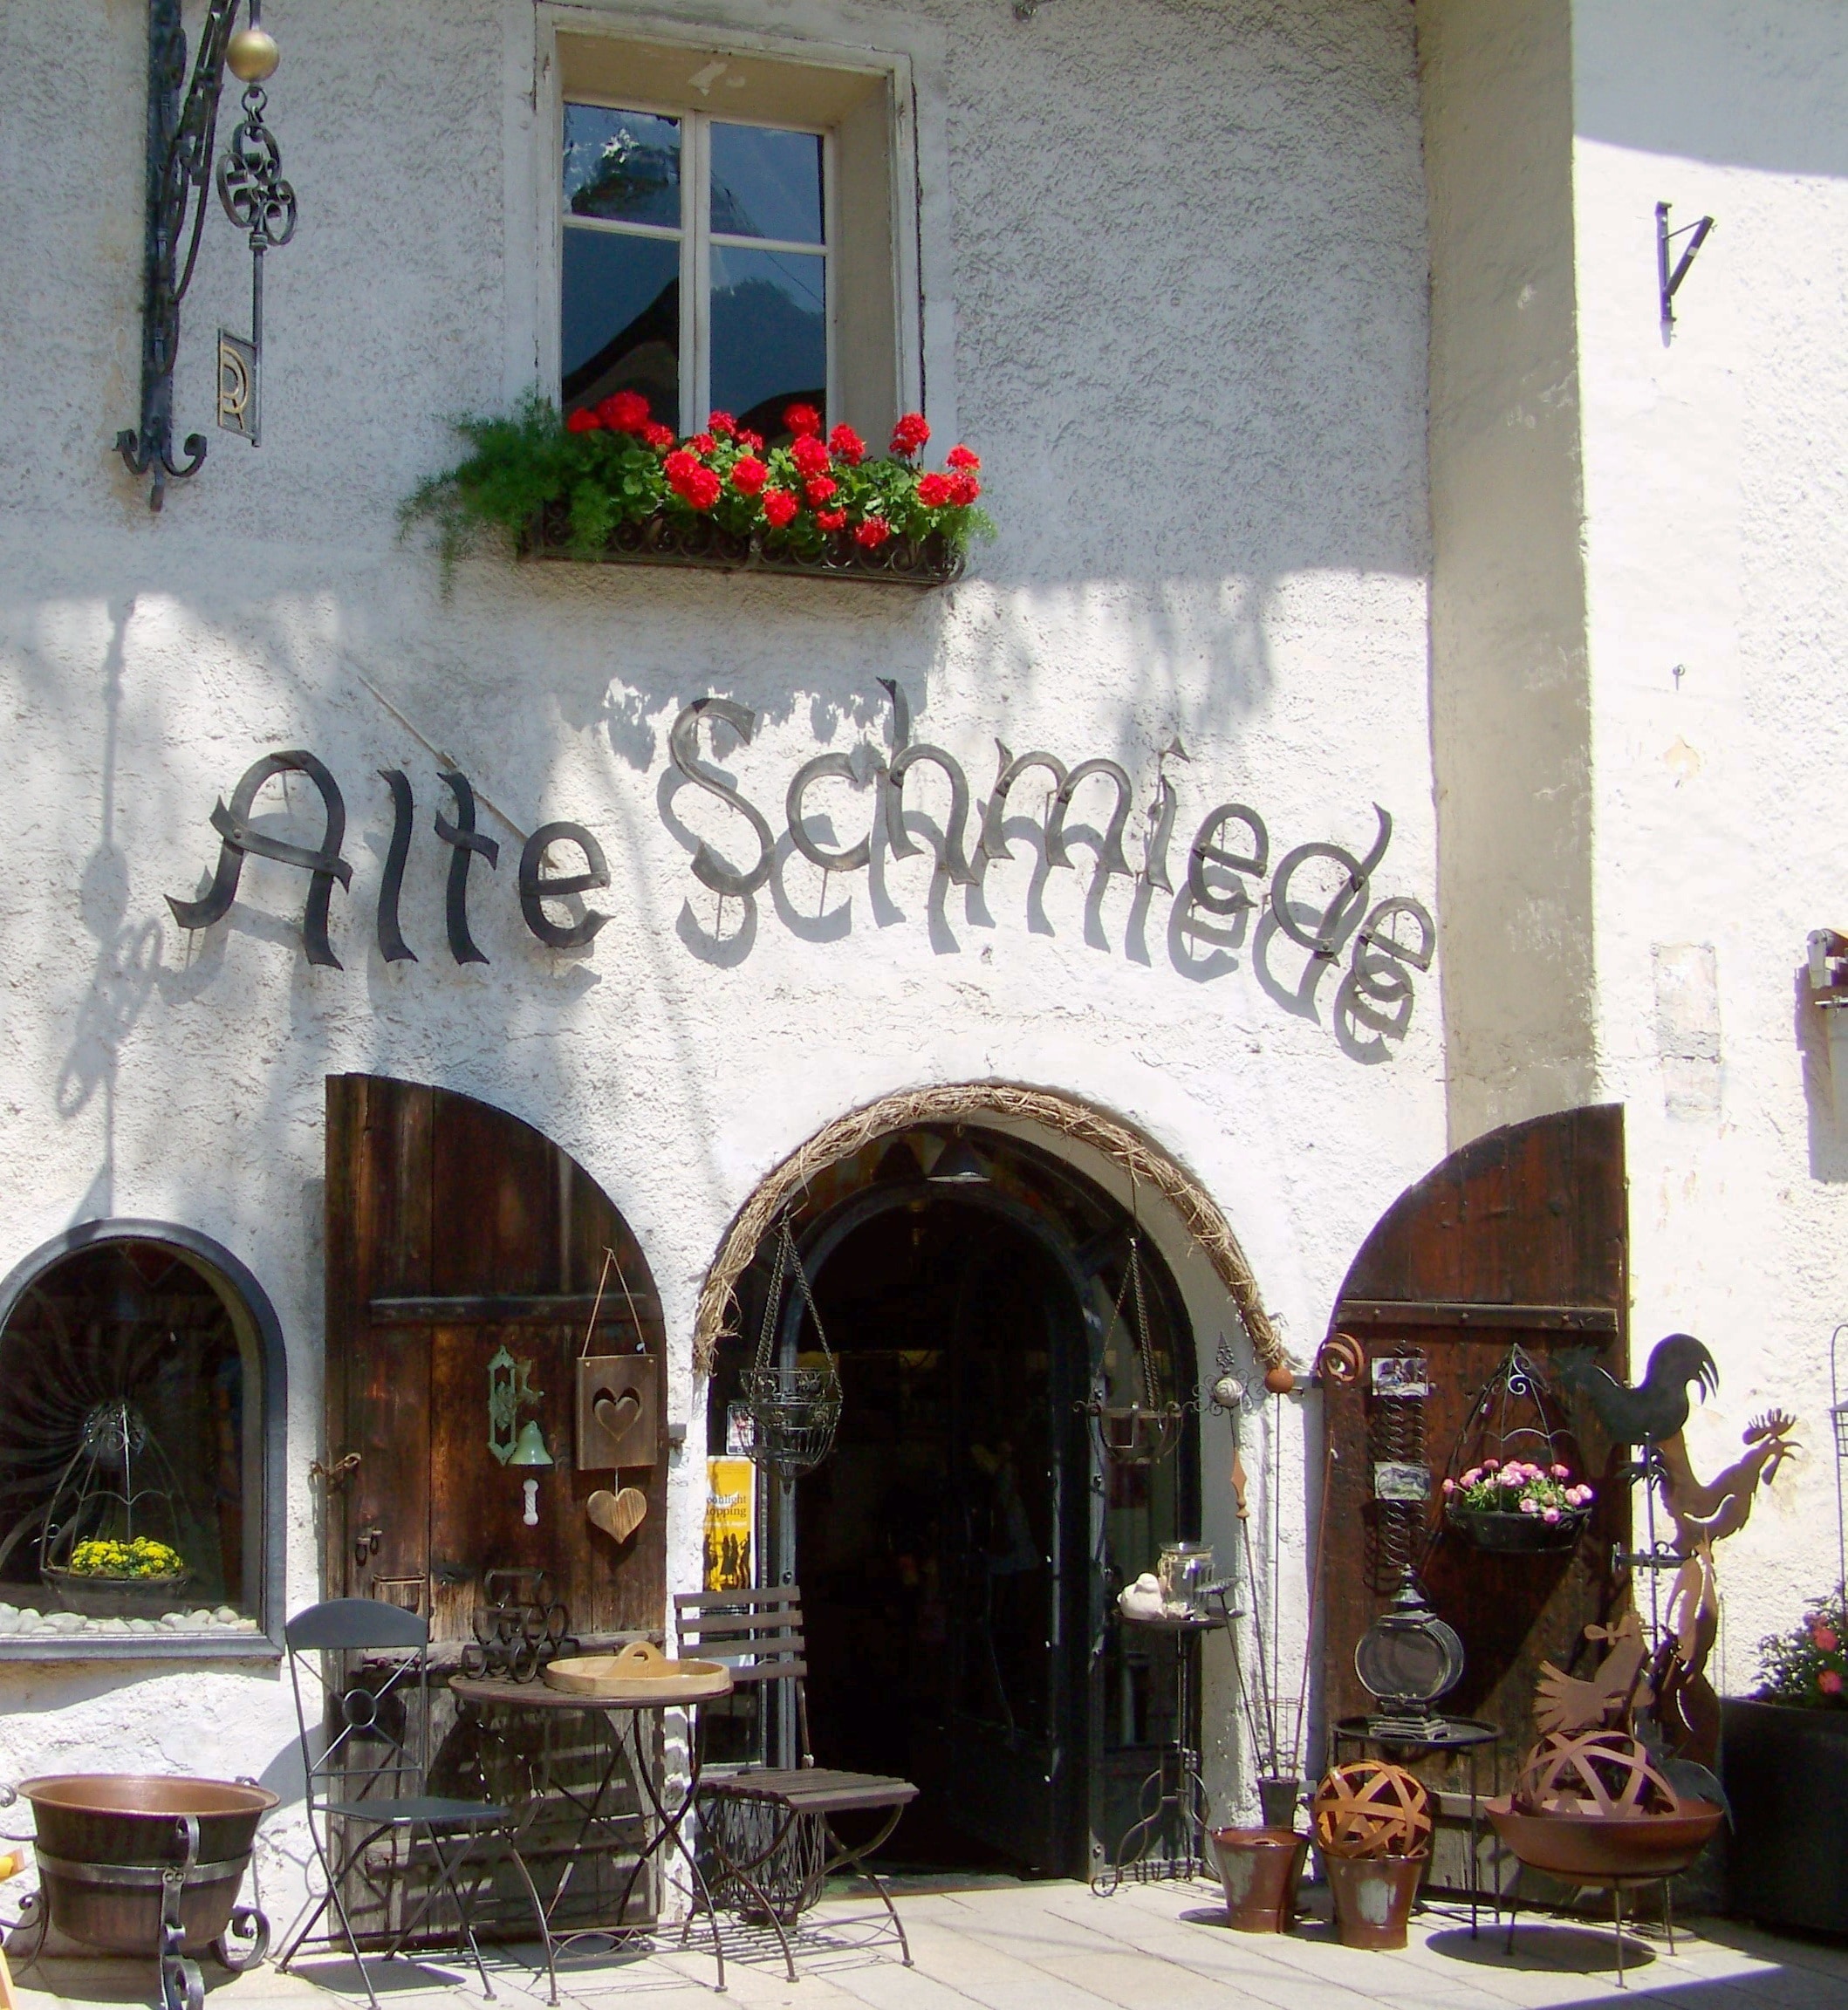 Alte Schmiede signage mount in white concrete wall